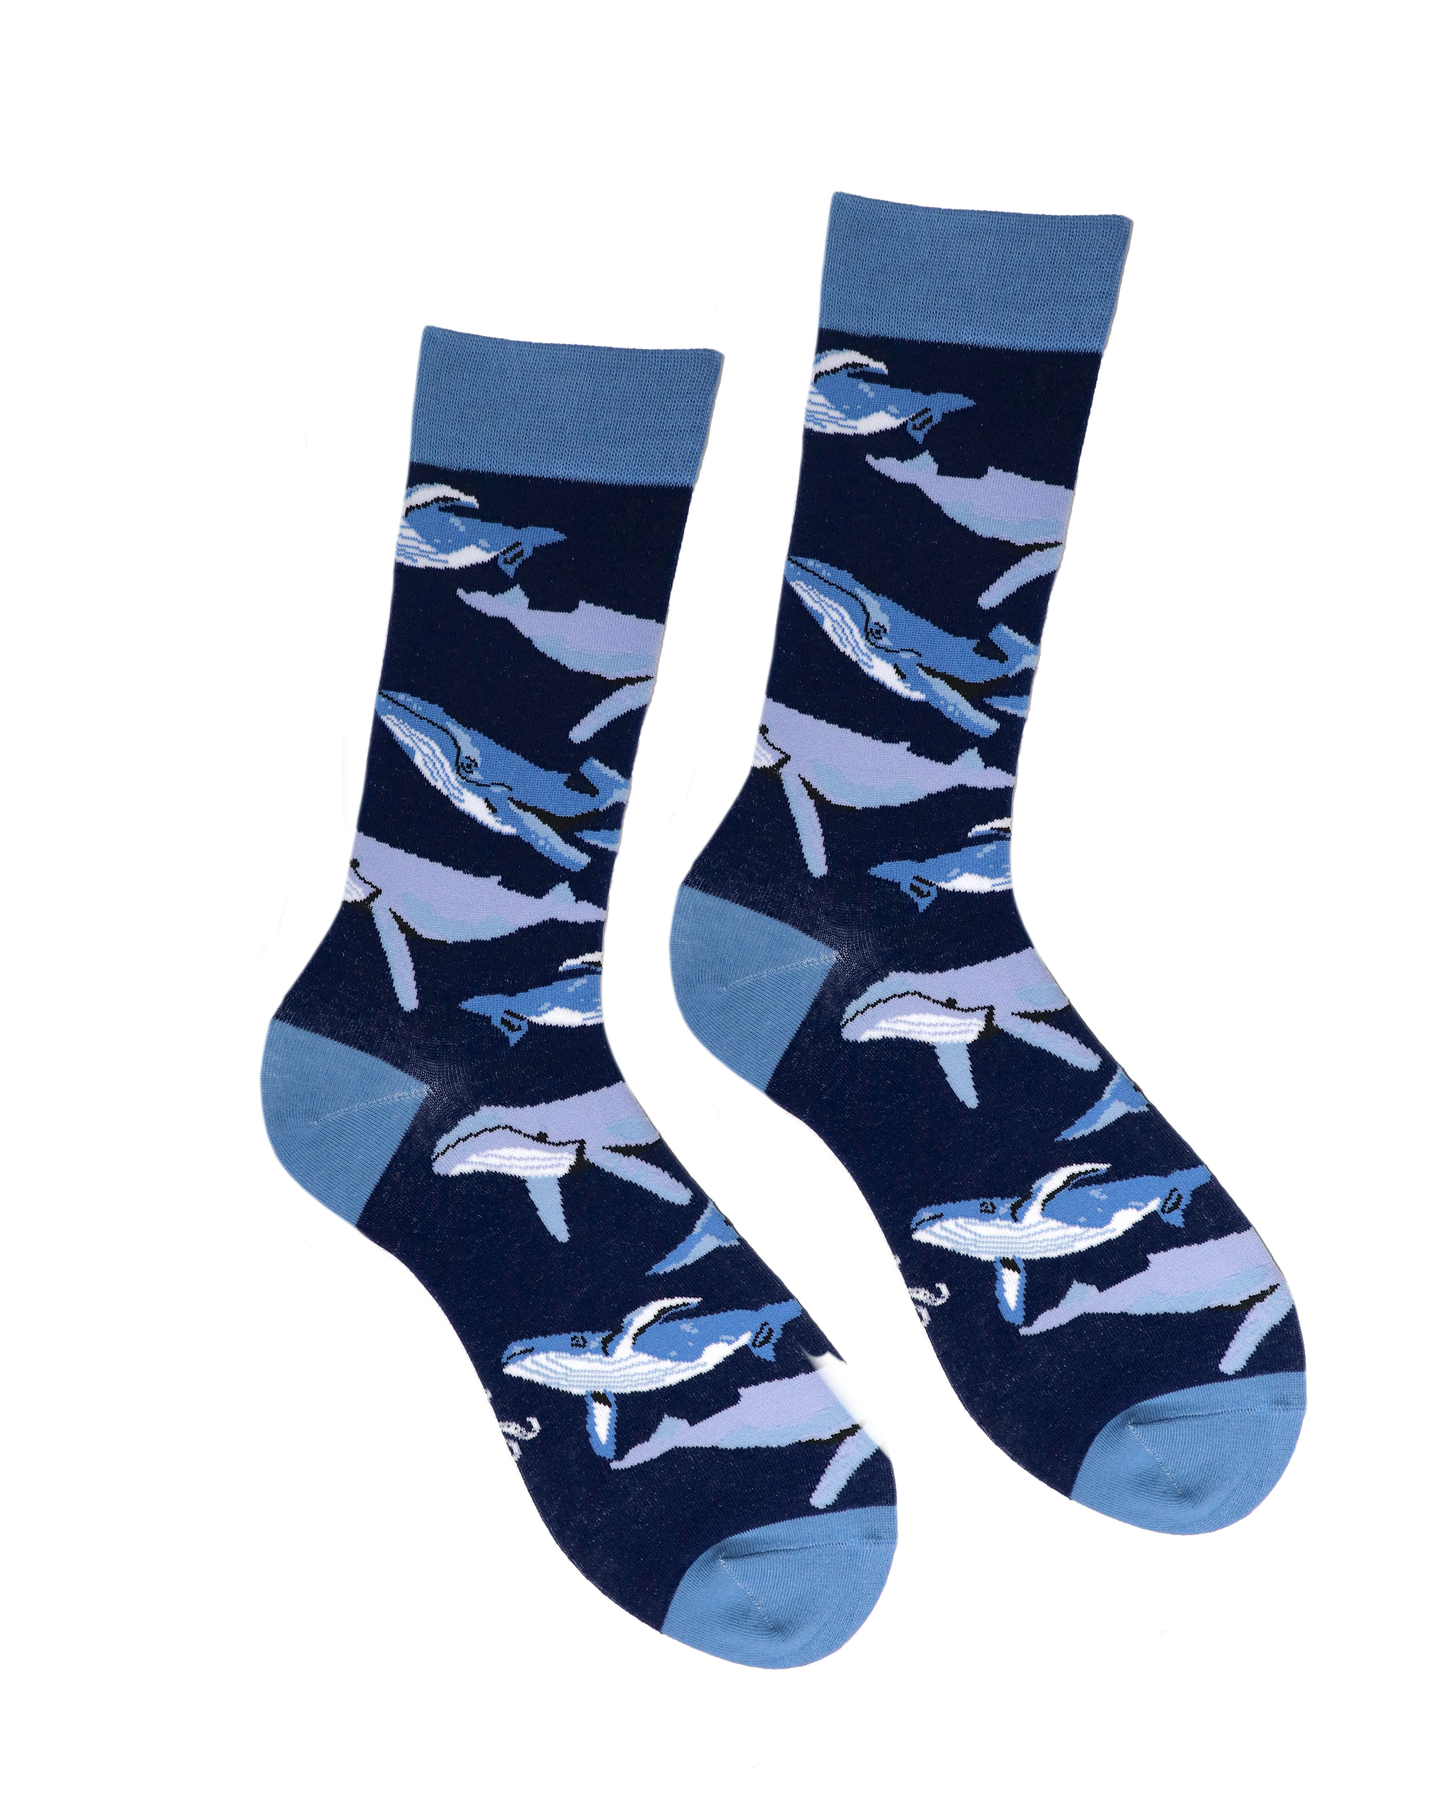 Whale Of A Time Socks